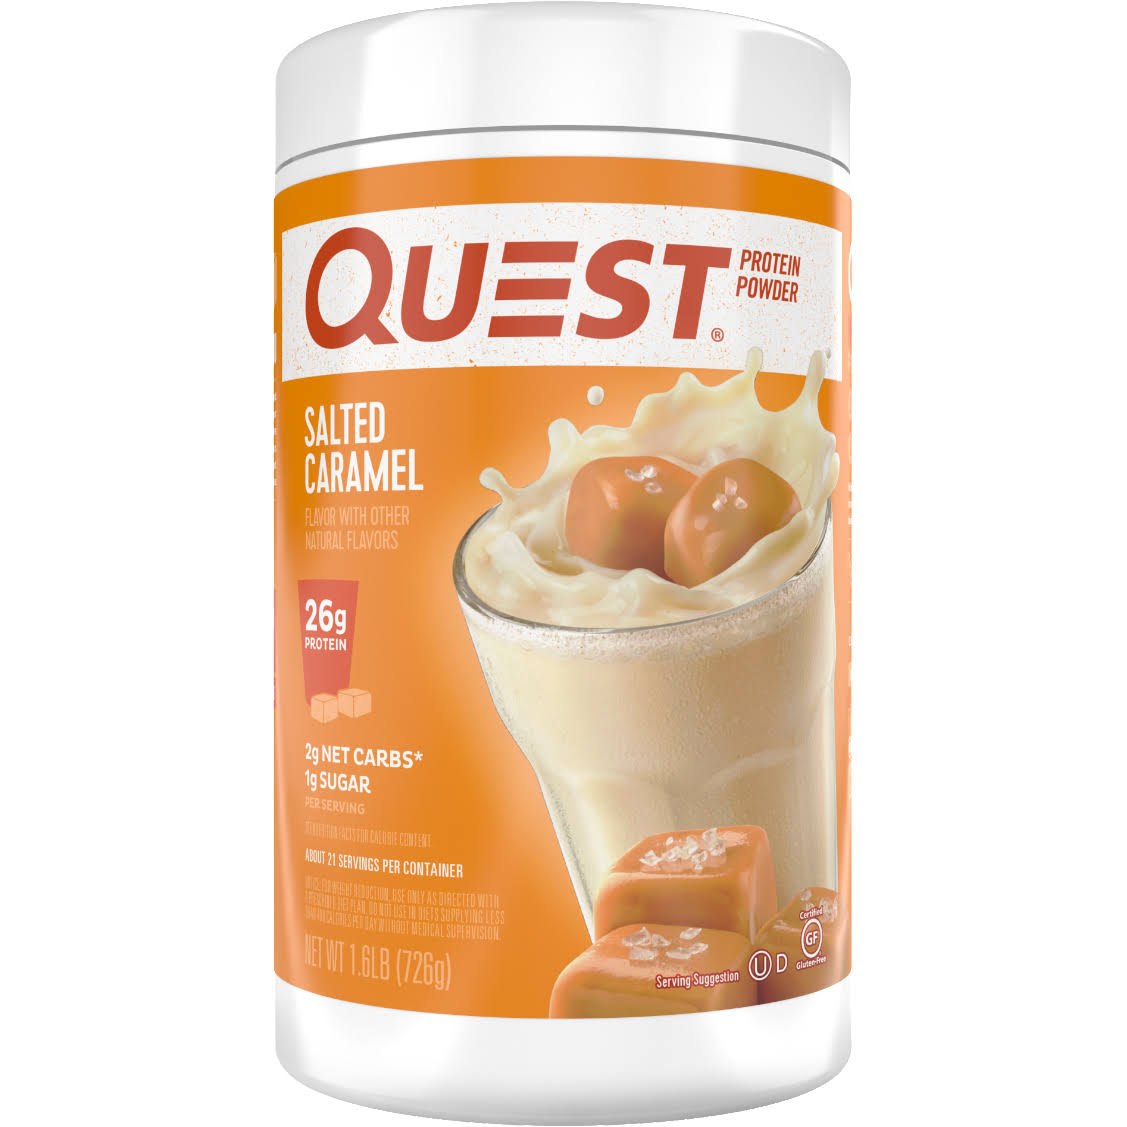 Quest Protein Powder - Salted Caramel, 1.6lbs